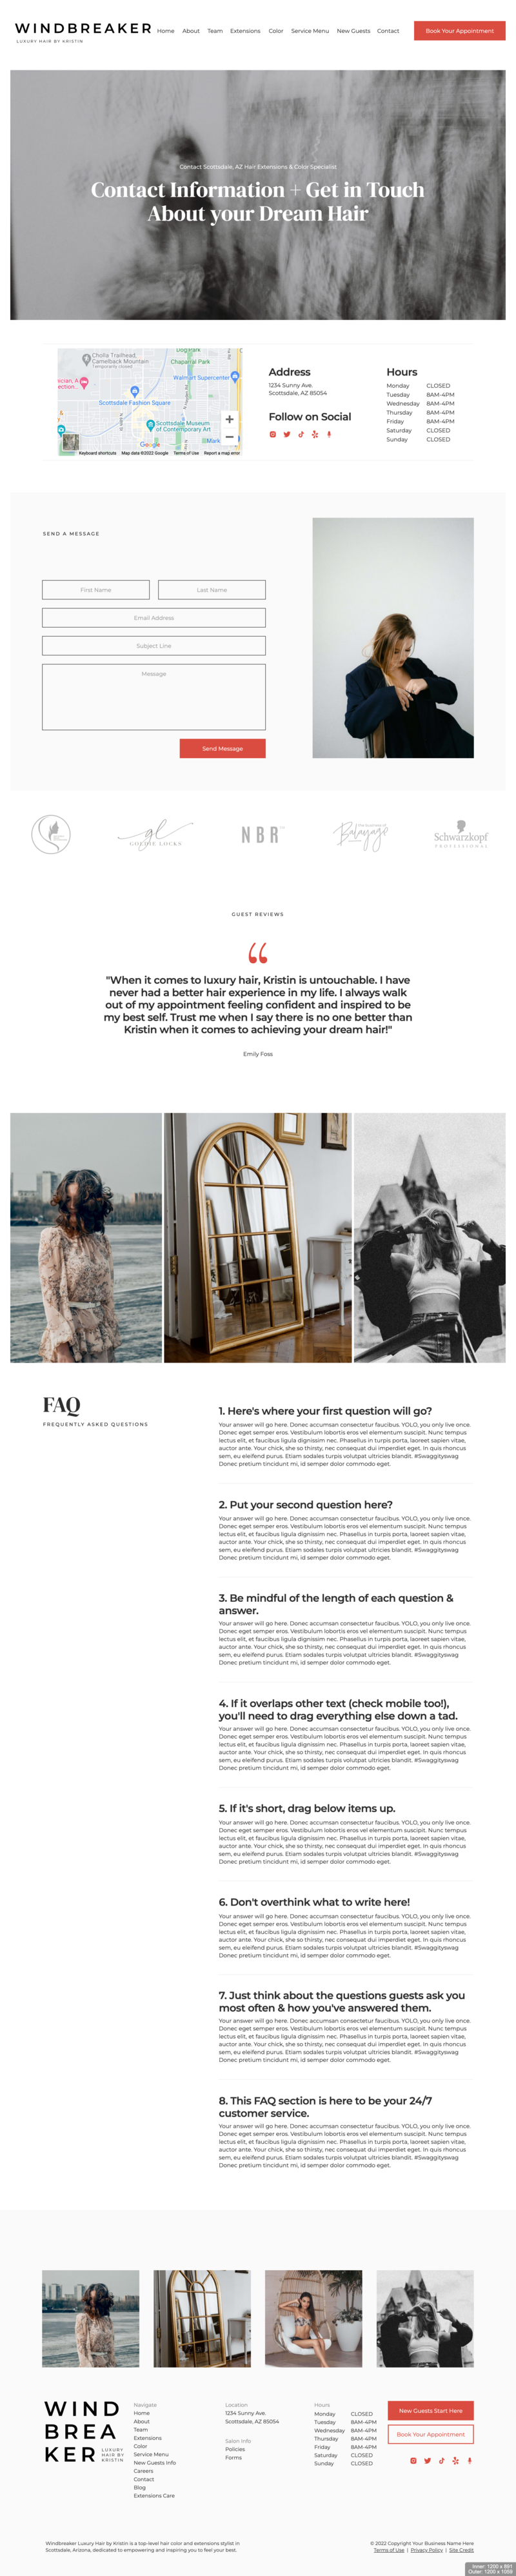 website-template-for-hair-stylists-salons-windbreaker-franklinandwillow-contact-13_35_35